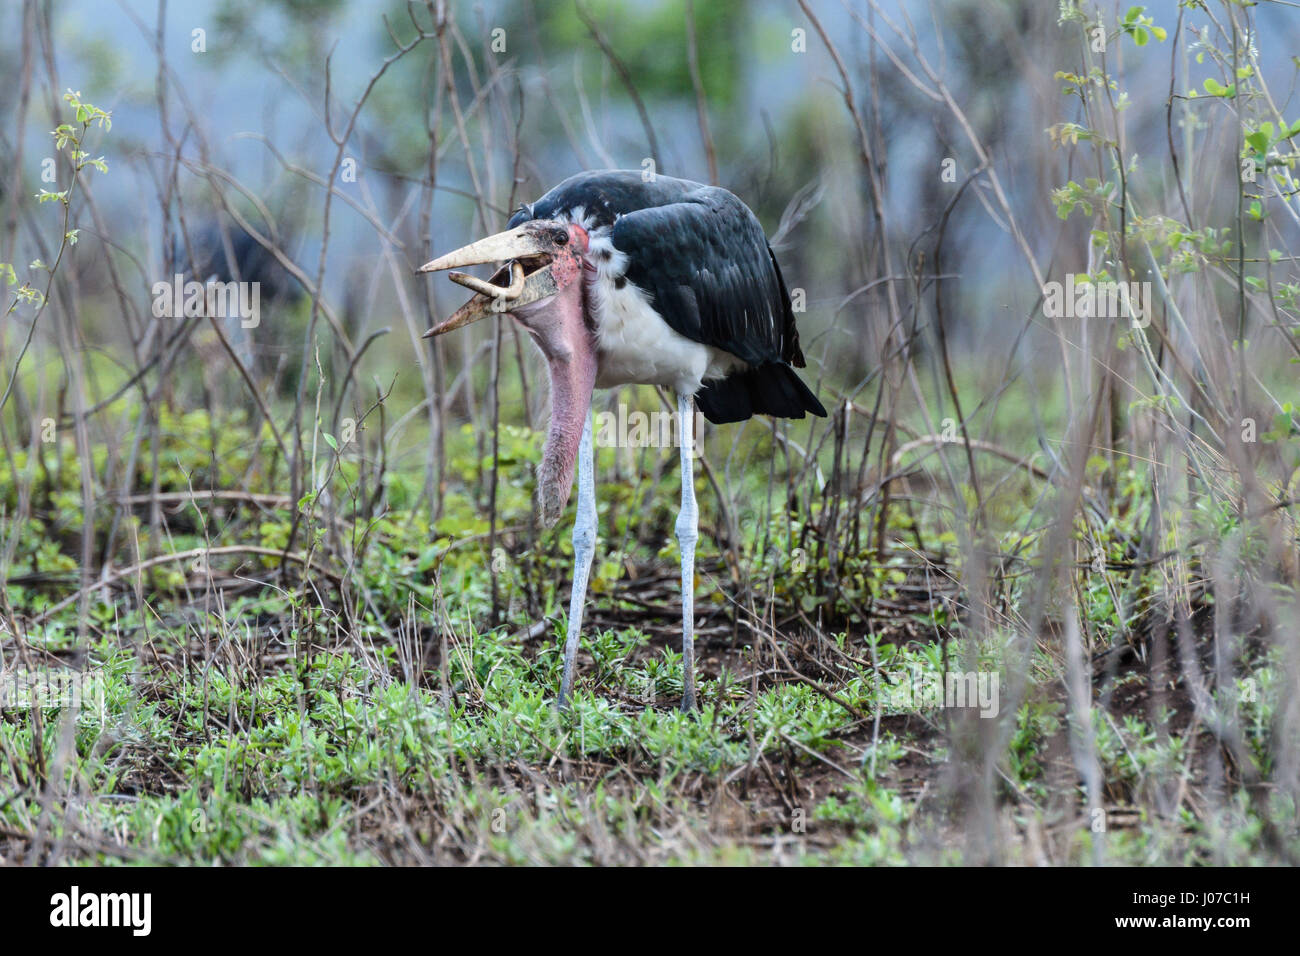 KRUGER NATIONAL PARK, SOUTH AFRICA: BIZARRE pictures by a British tourist show how there was no escape for this giant blind snake as it was swallowed alive by a hungry bird. The meal-time images show the snake struggle to get away after the Marabou Stork picks it up, but ultimately the huge waiting mouth is the only place to go. The images were captured by retired International Tax and Customs Consultant Ken Haley (63), from Newcastle-upon-Tyne, as he was in Kruger National Park, South Africa. Stock Photo